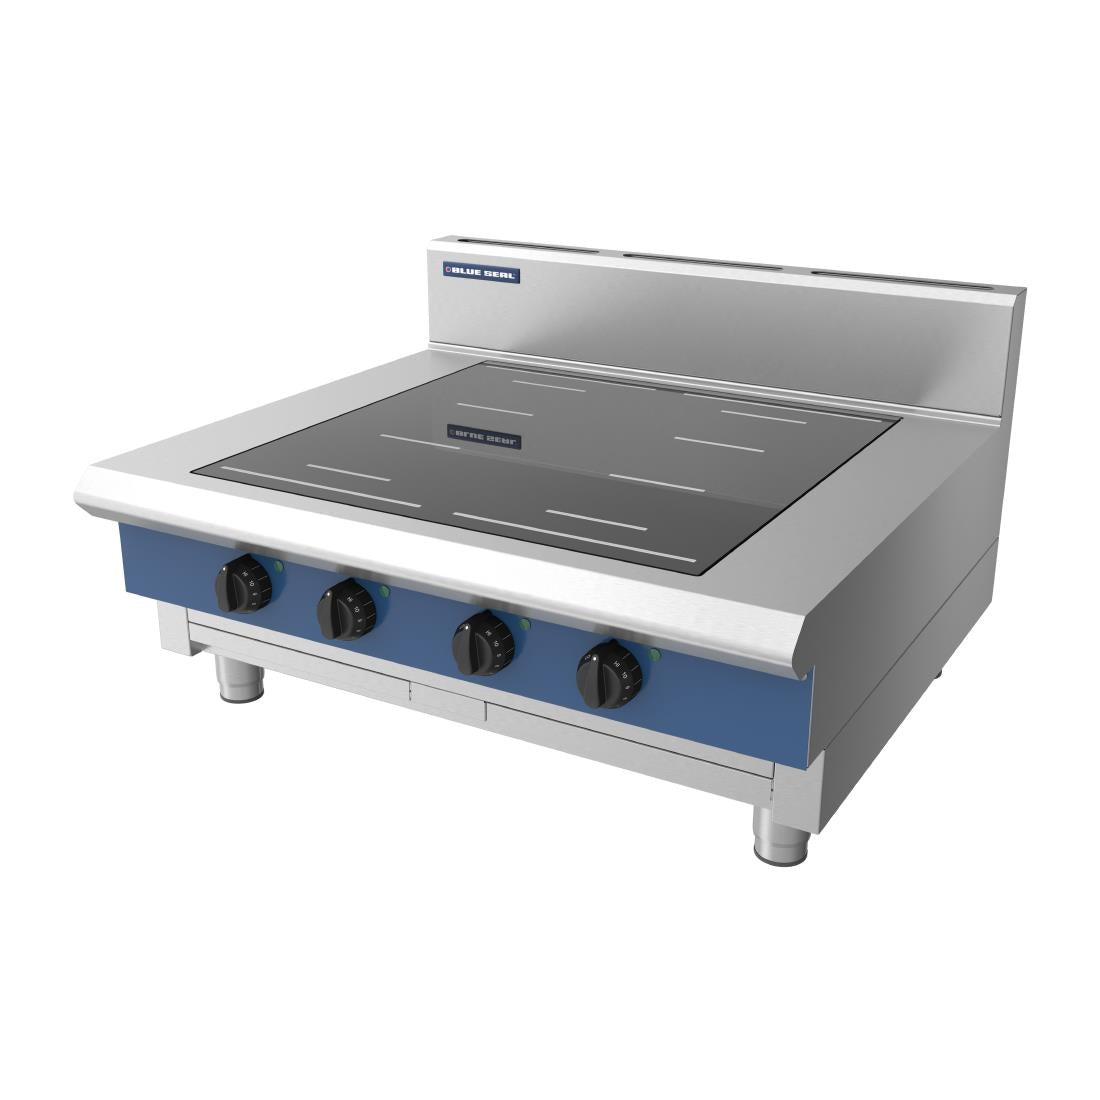 DX759 Blue Seal Evolution Series IN514F-B - 900mm Induction Cooktops - Bench Model - 20kW JD Catering Equipment Solutions Ltd